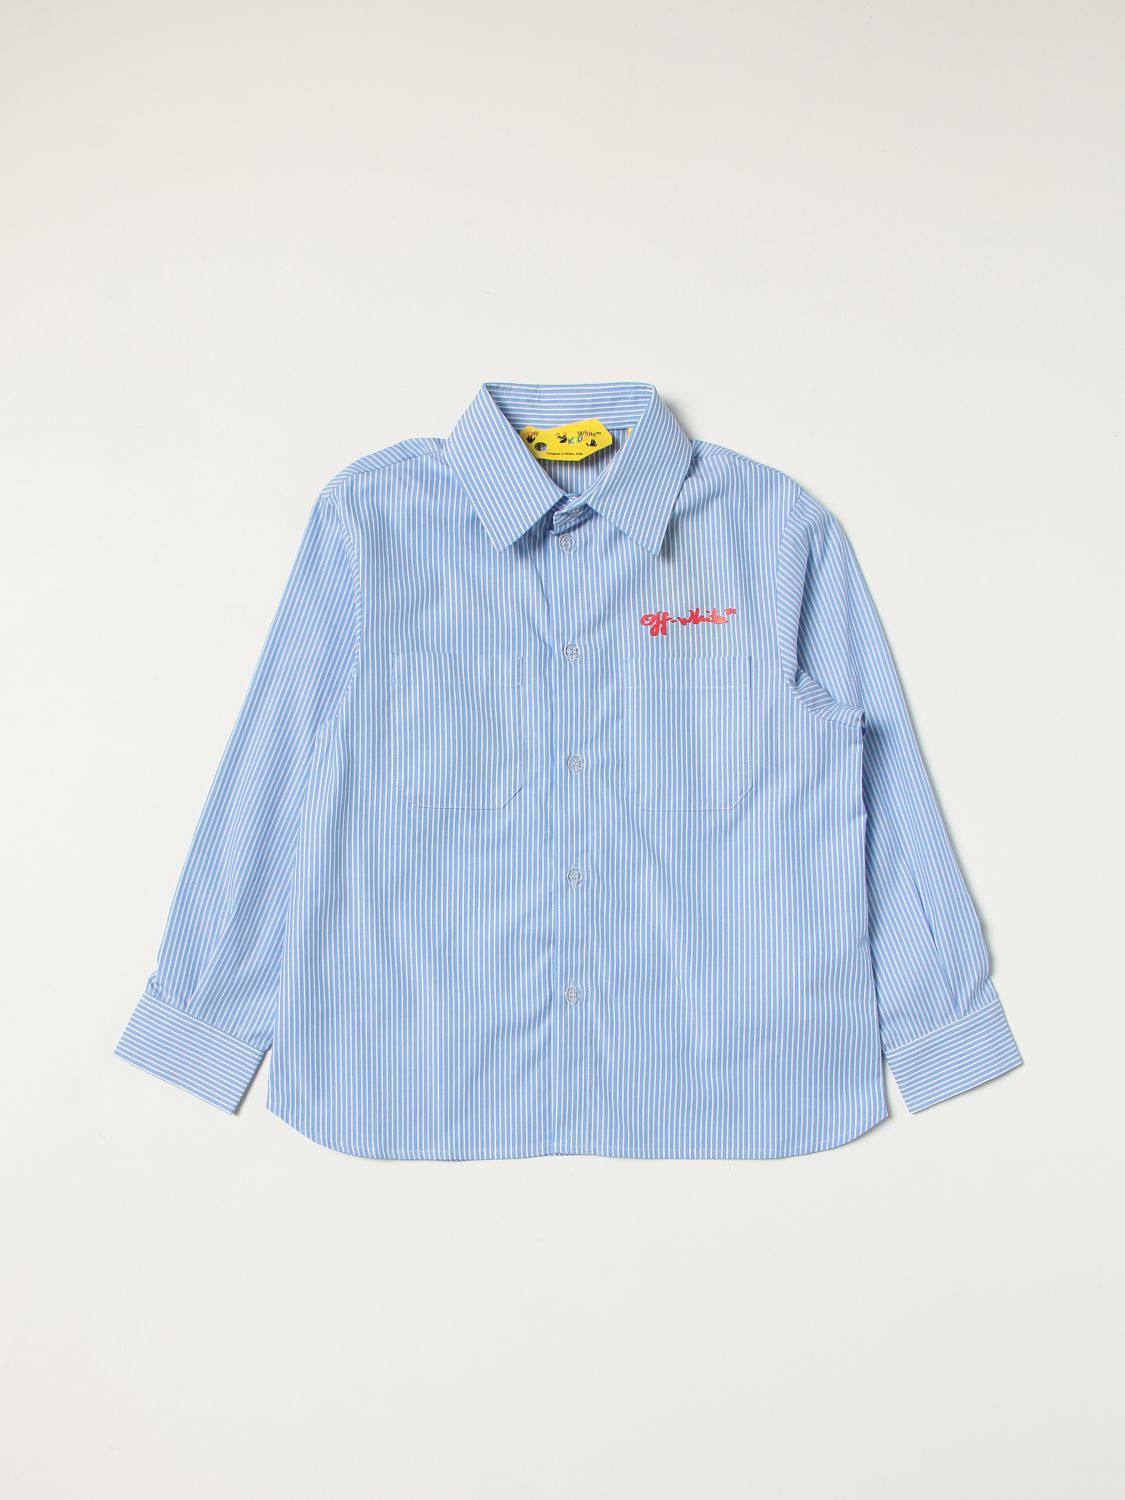 OFF-WHITE: Off White striped cotton shirt with embroidery - Blue | Off ...